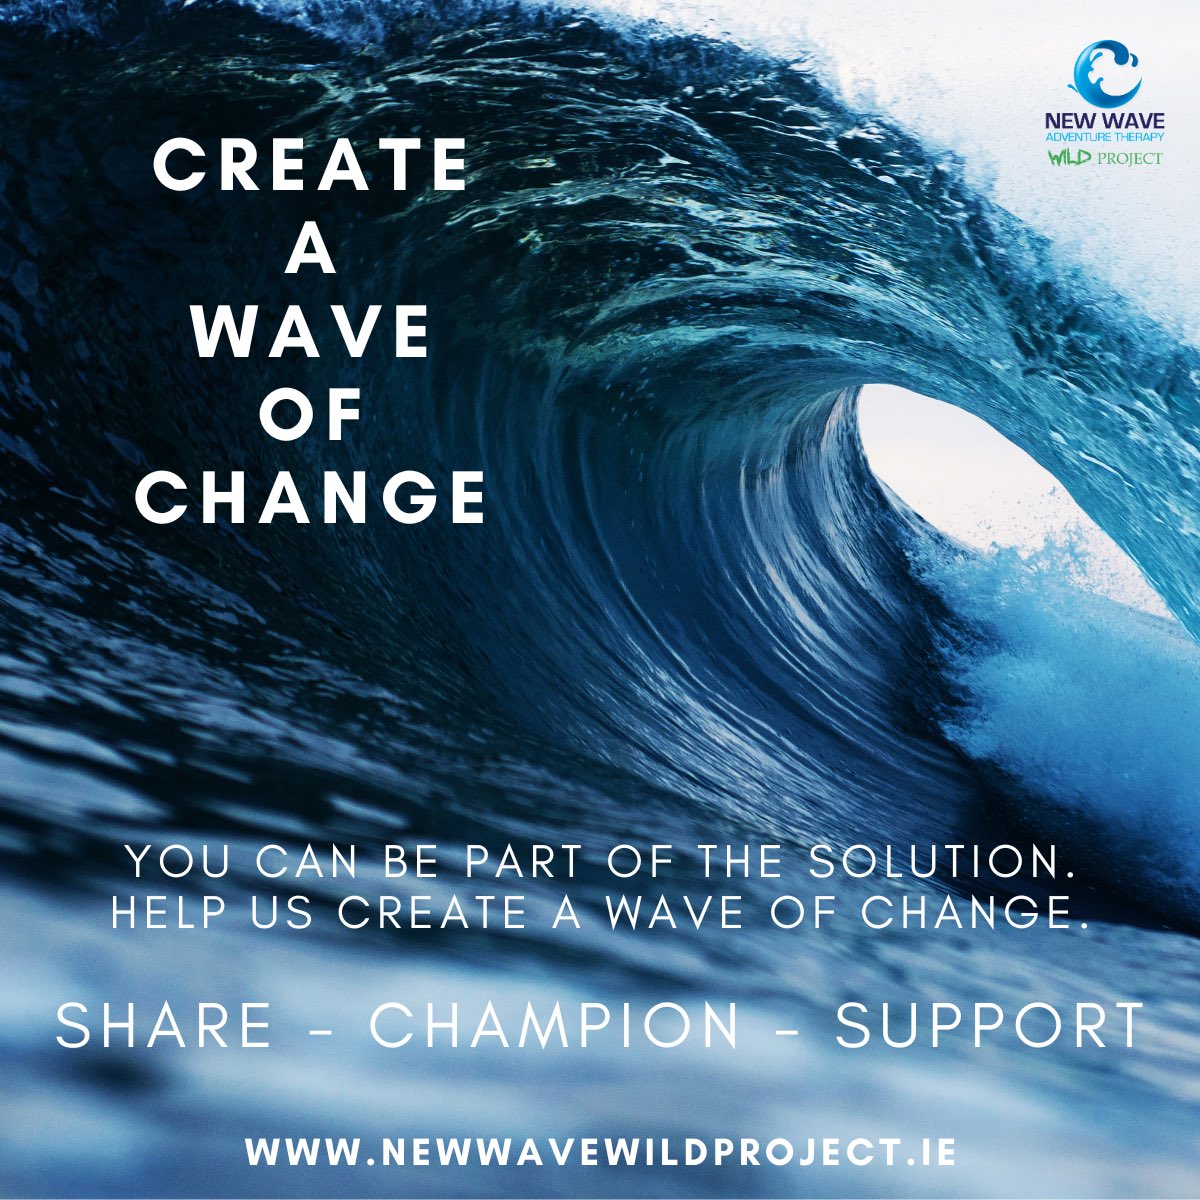 We are here to Create A Wave of Change ~ you can be part of the solution by sharing, championing, or directly supporting our work. #adventuretherapy #waveofchange #newwavewildproject #champion #support #share